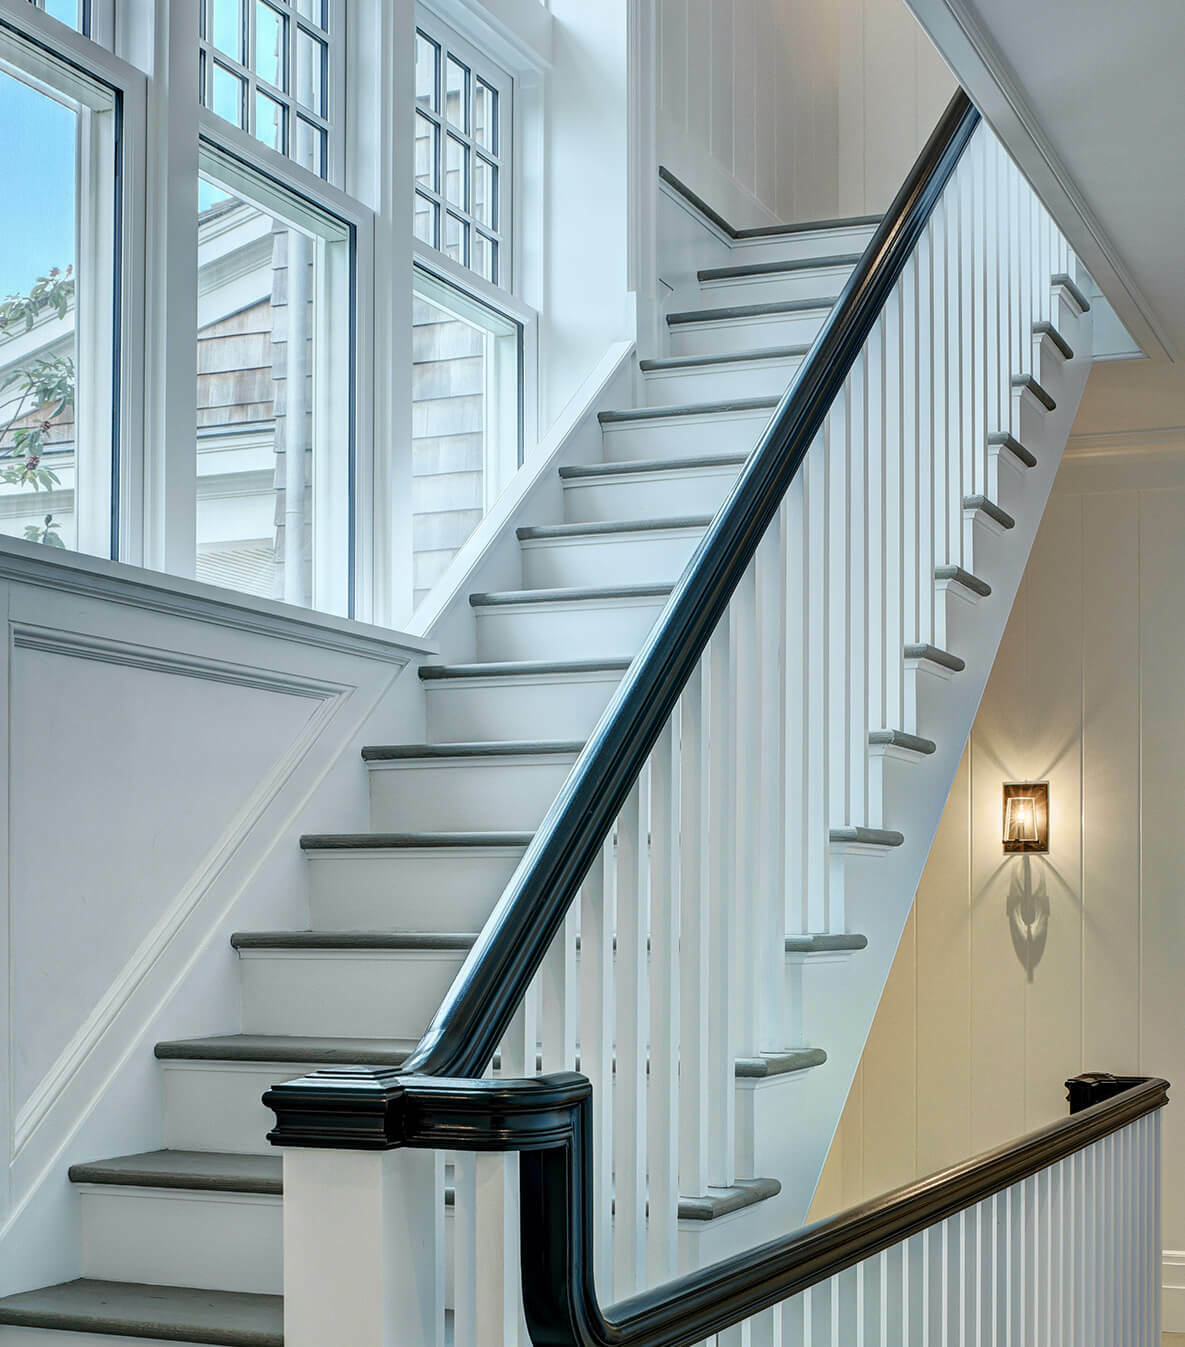 The staircase of a home on Hook Pond in East Hampton Village. COURTESY BUILDING DETAILS